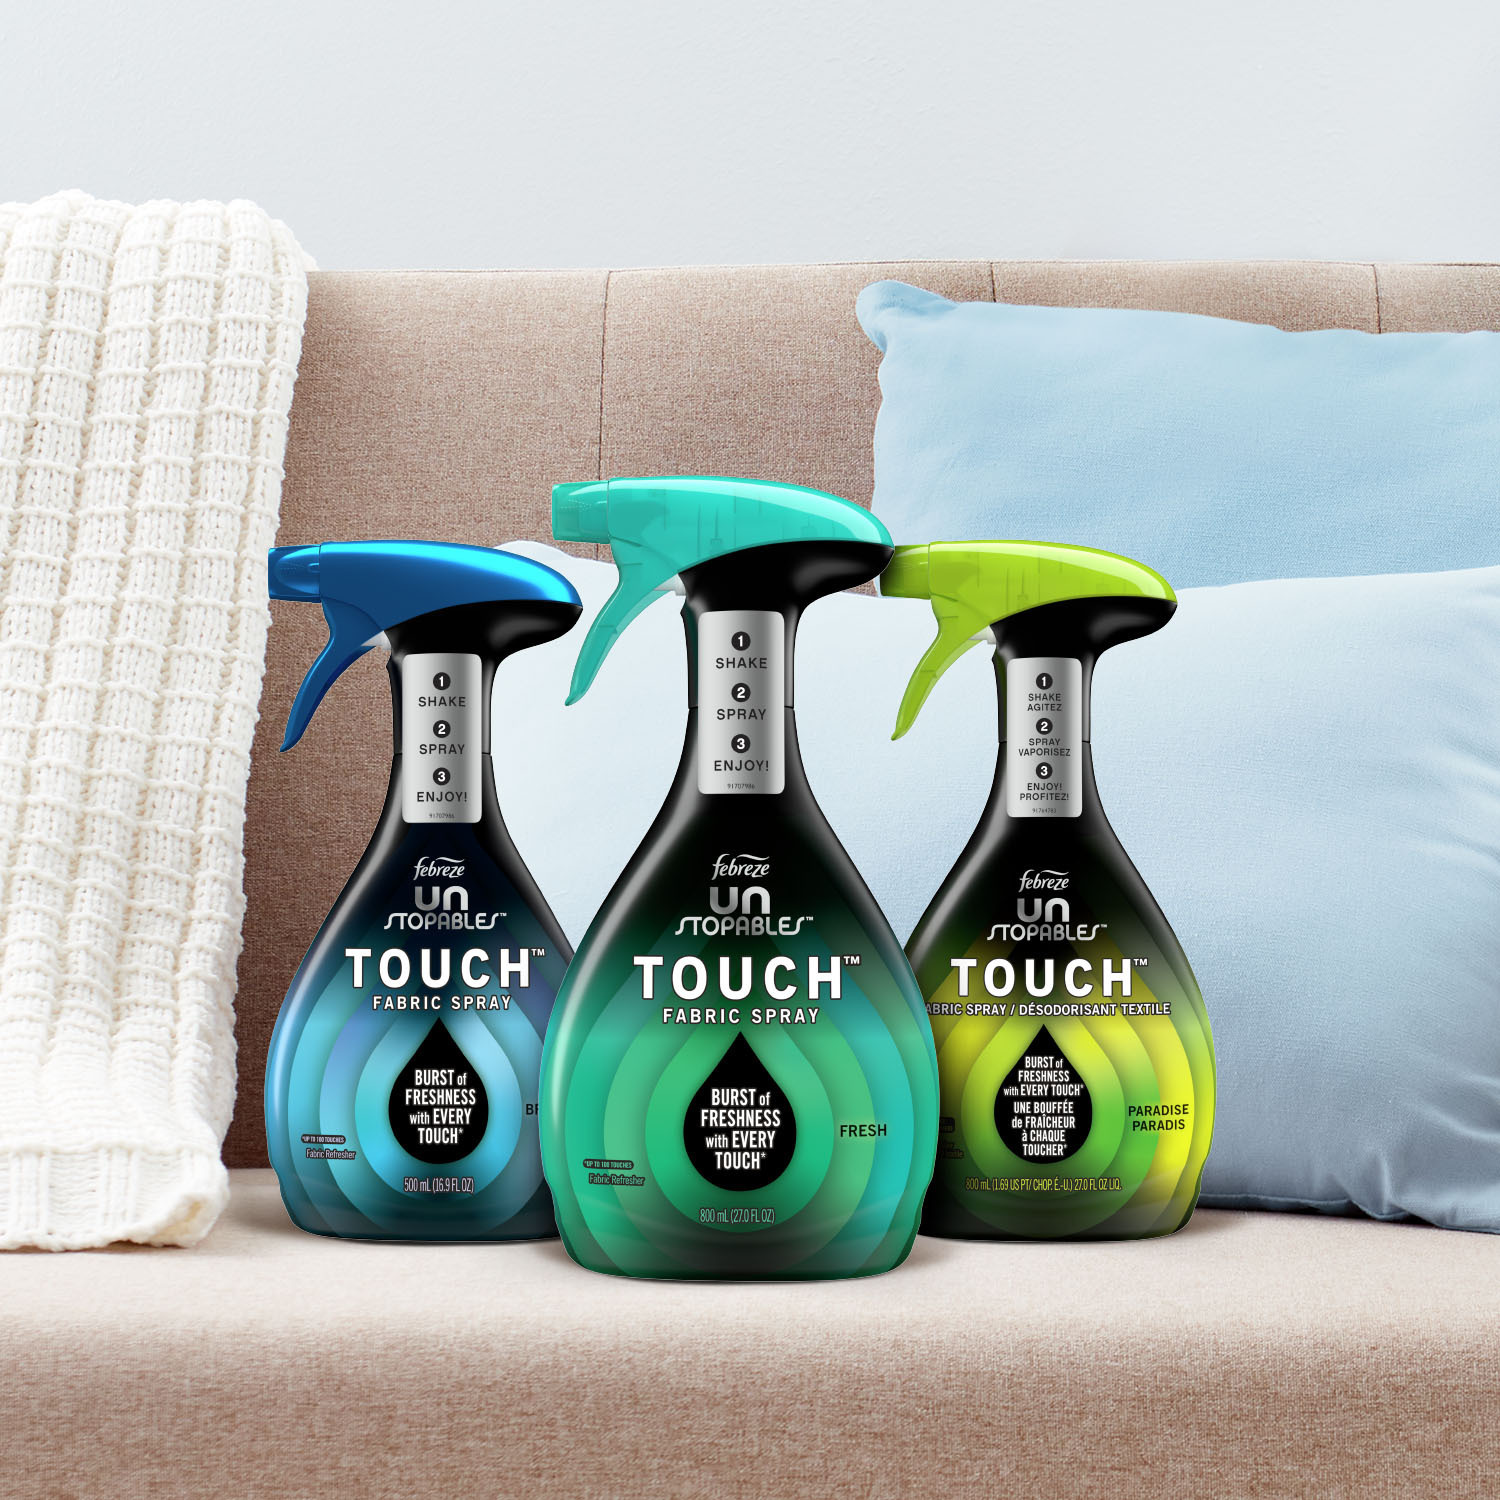 Febreze Reinvents Fabric Freshness with New Febreze Touch Technology